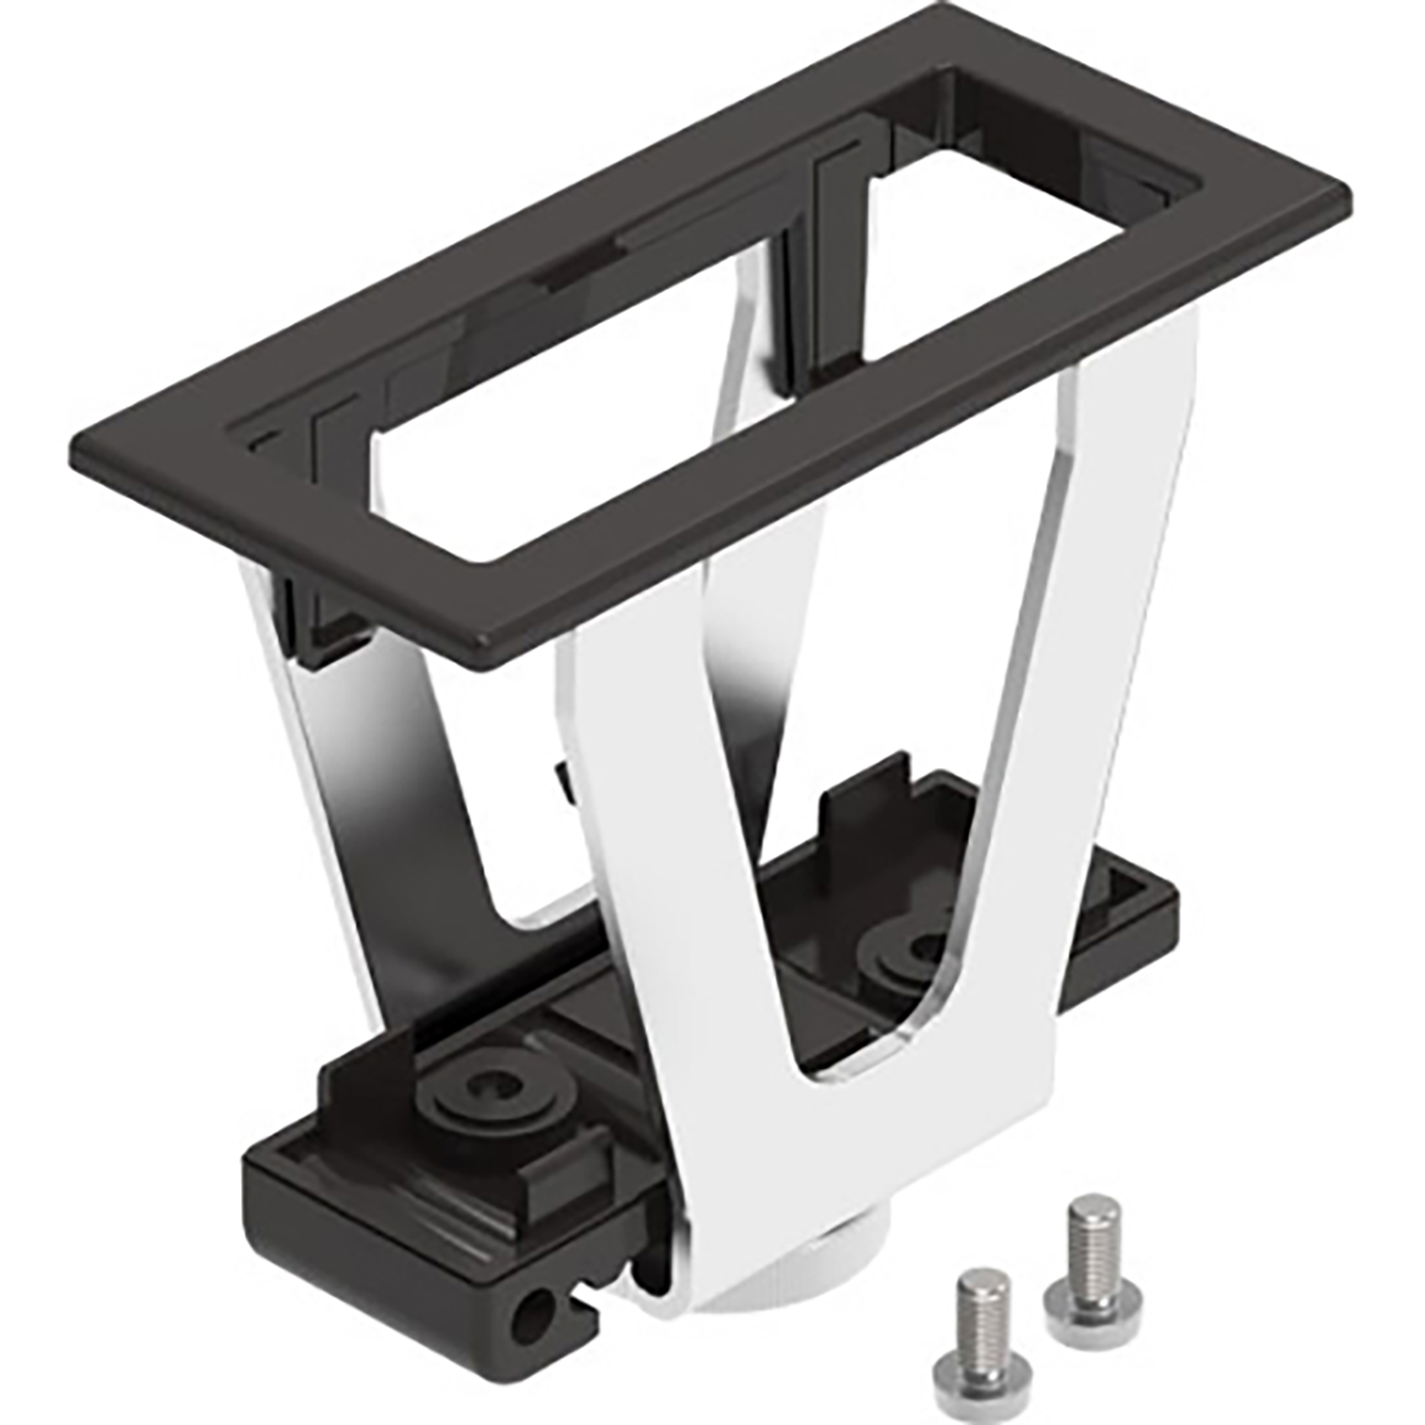 SAMH-FH-F FRONT PANEL MOUNTING KIT